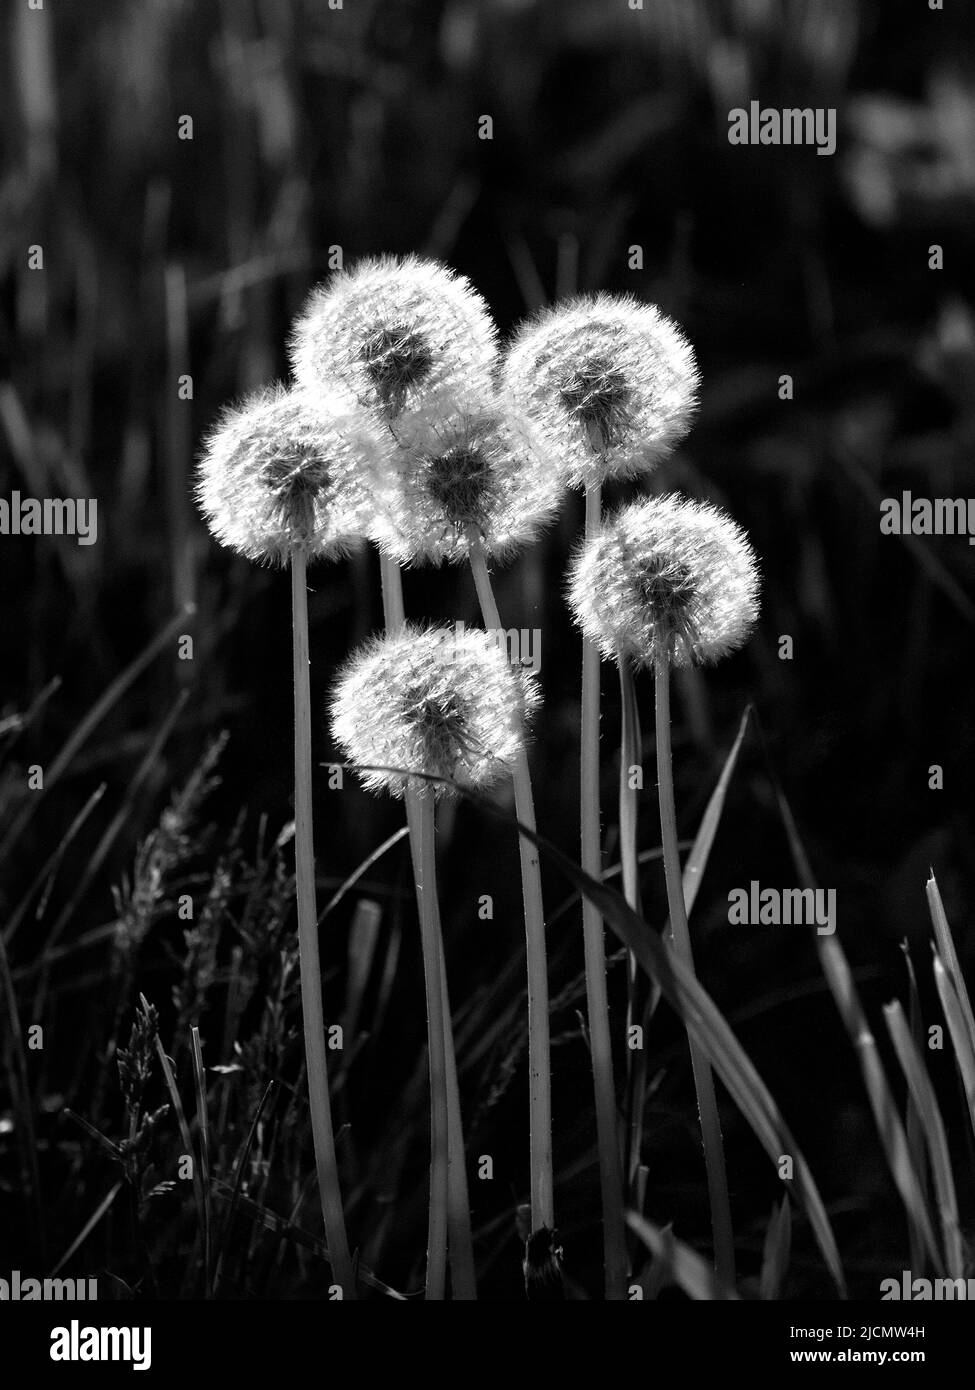 Black and white image of dandelion seed heads in springtime sunlight. Stock Photo